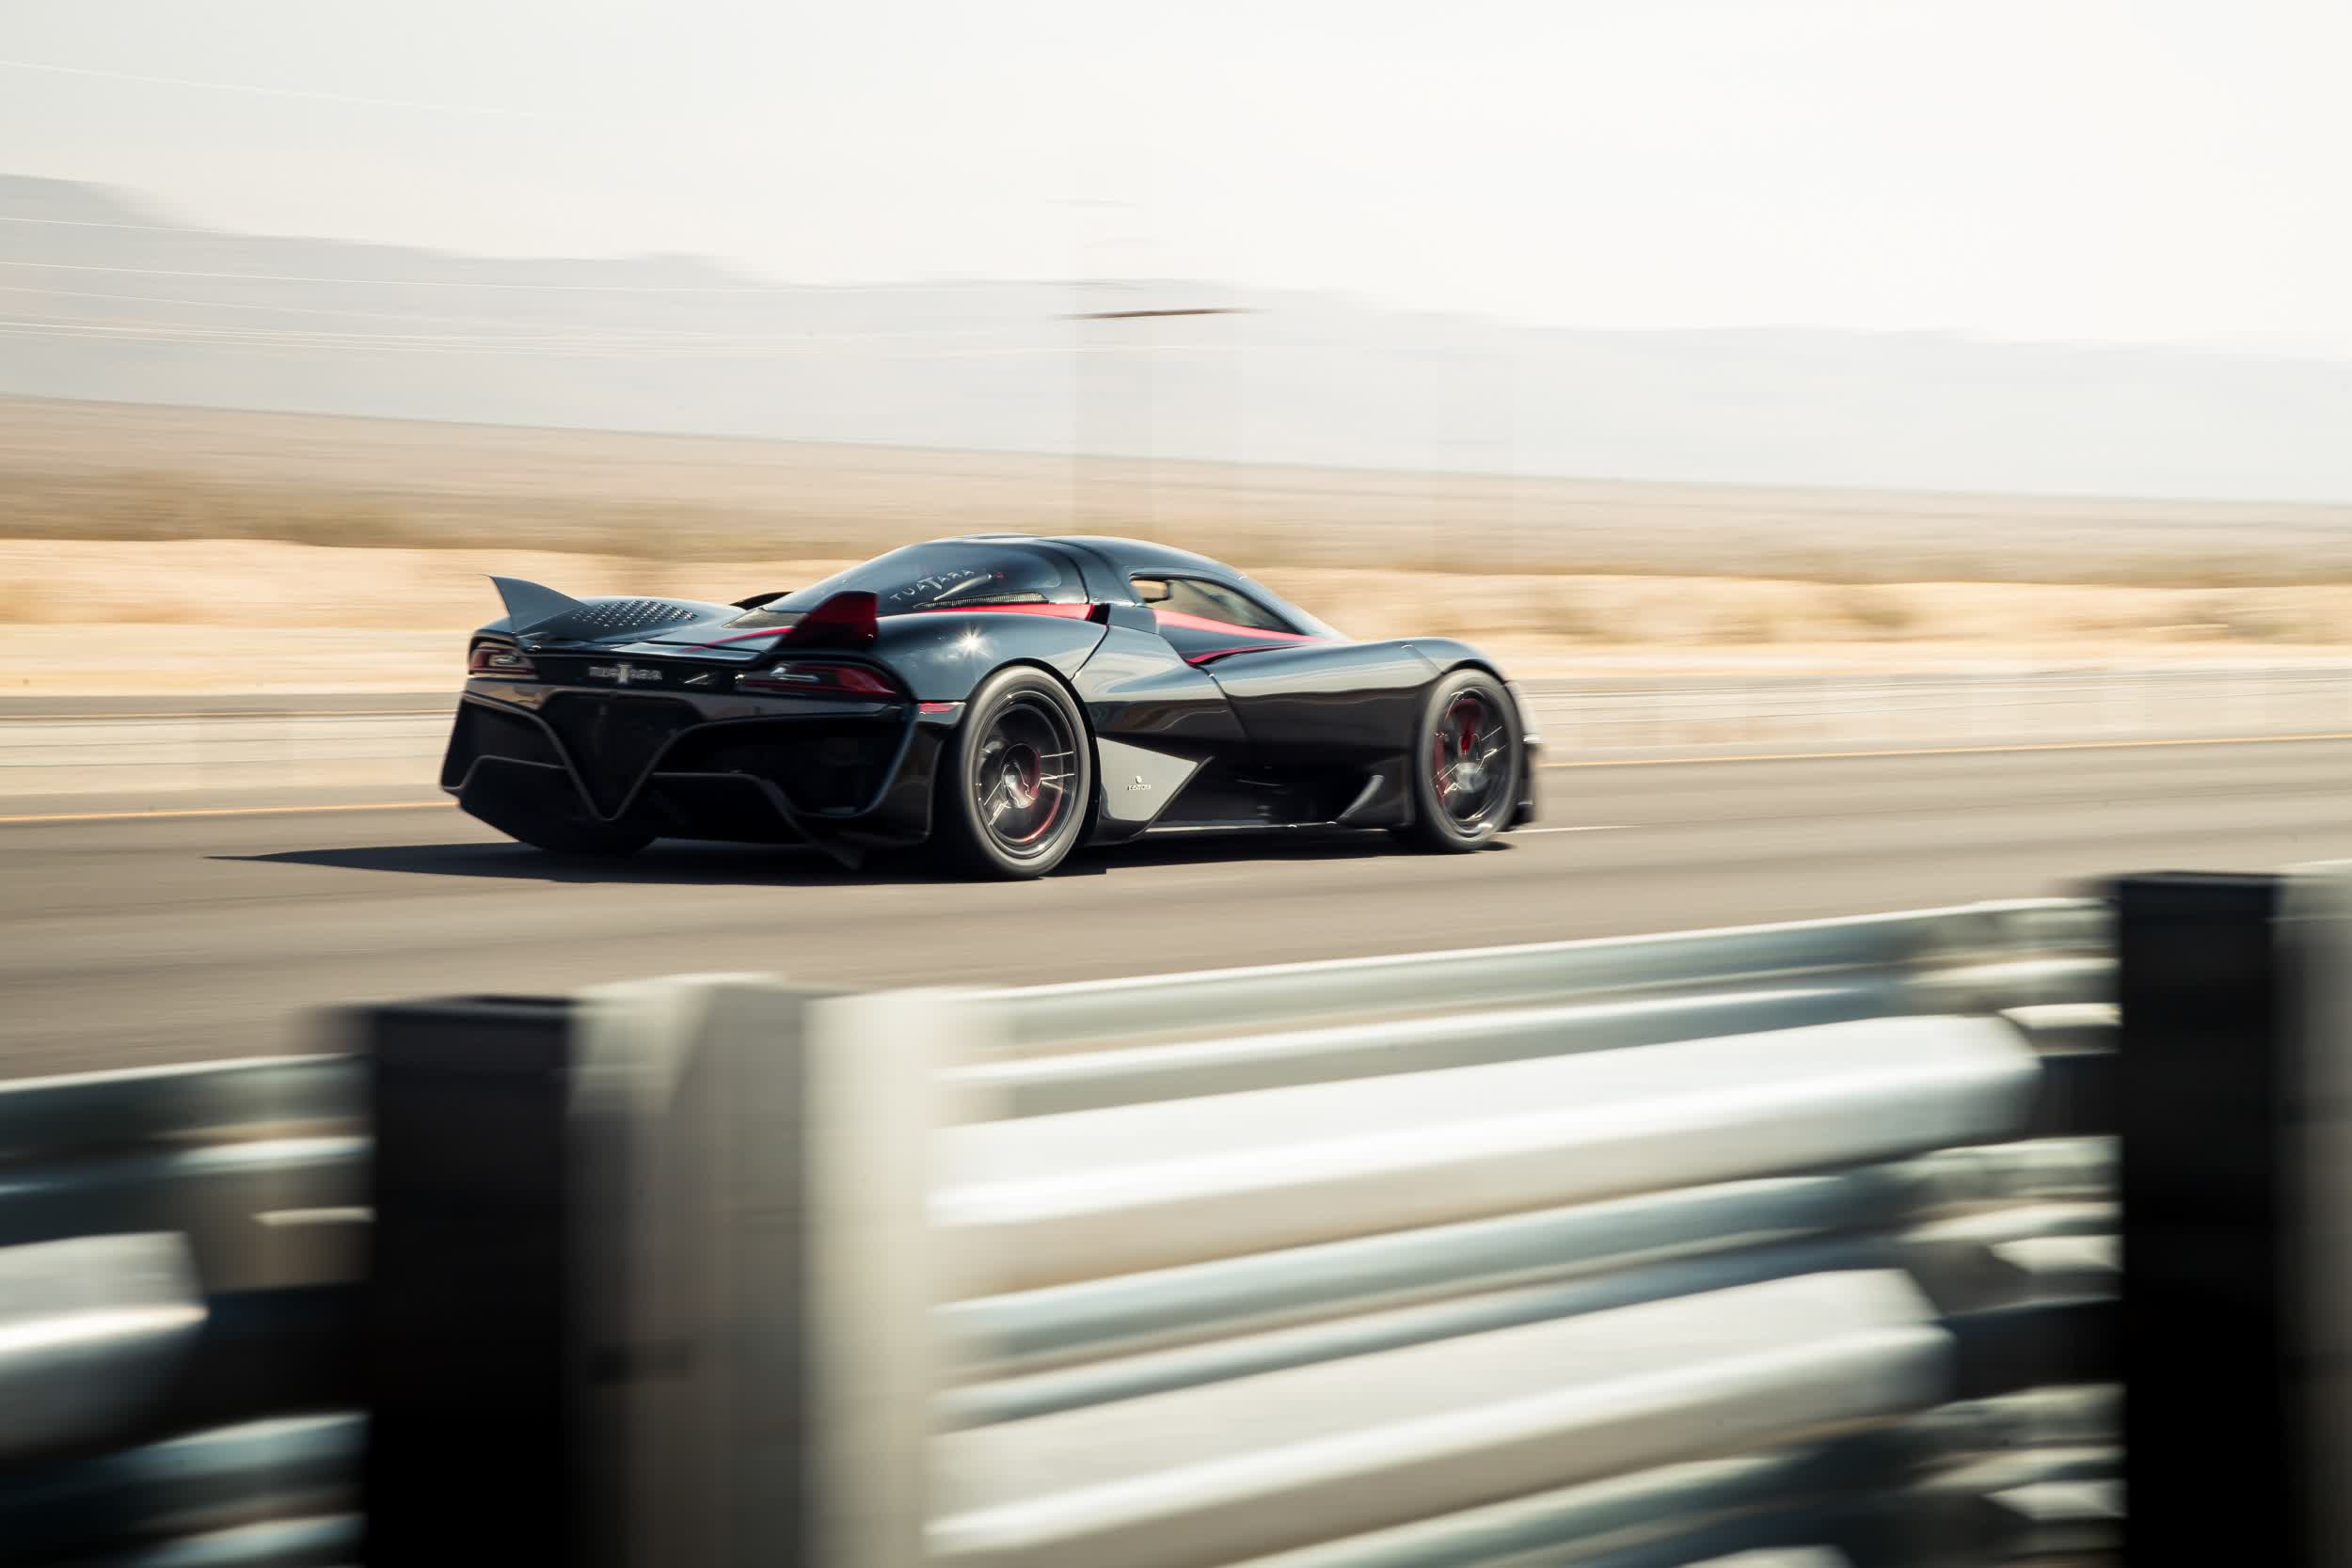 An American hypercar has smashed the top speed world record for a production car